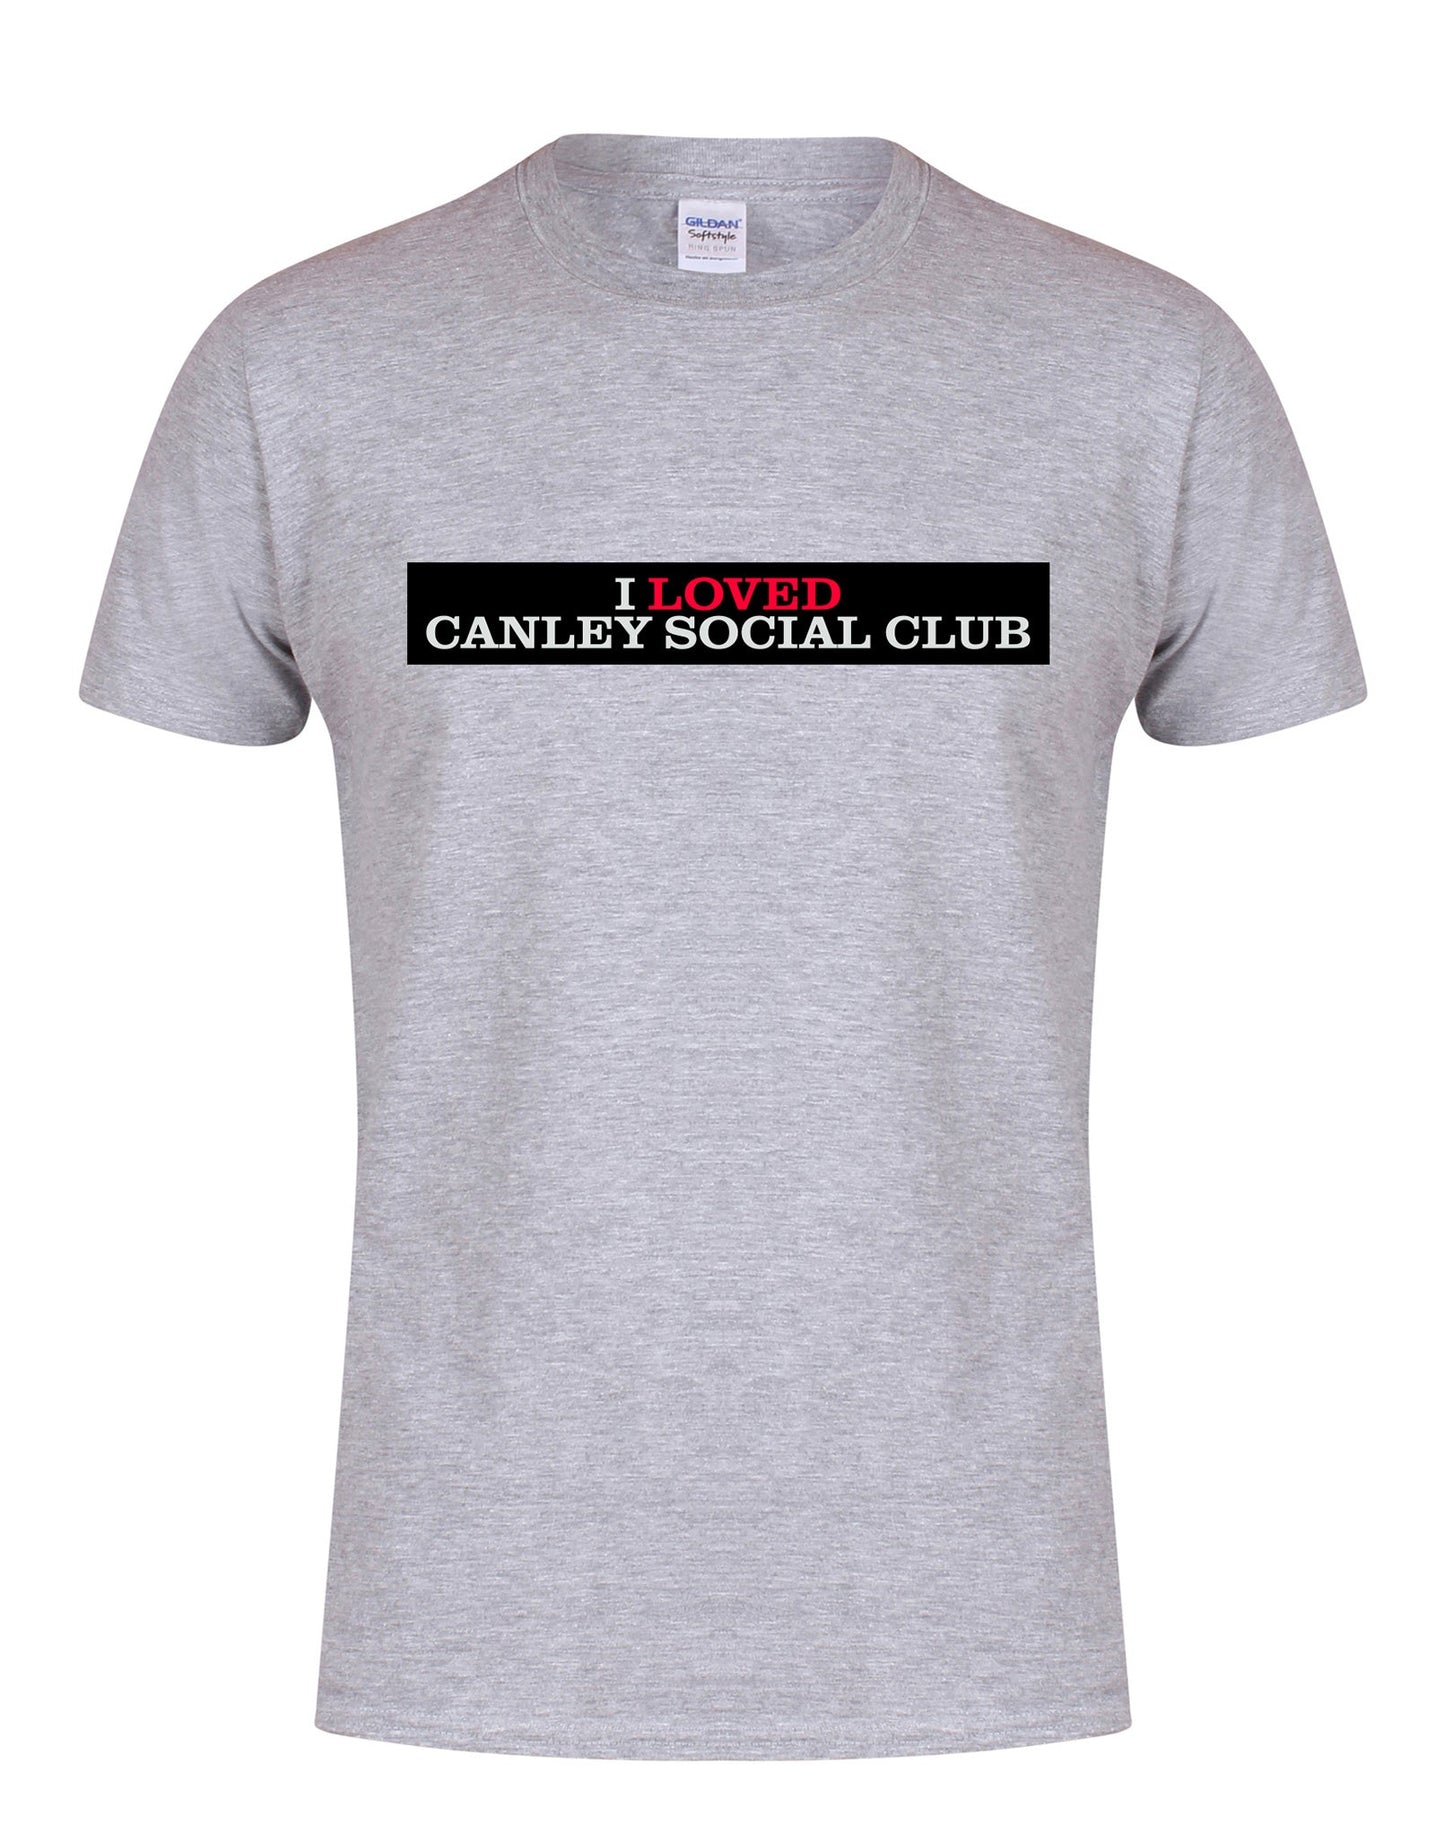 I loved Canley Social Club unisex fit T-shirt - various colours - Dirty Stop Outs